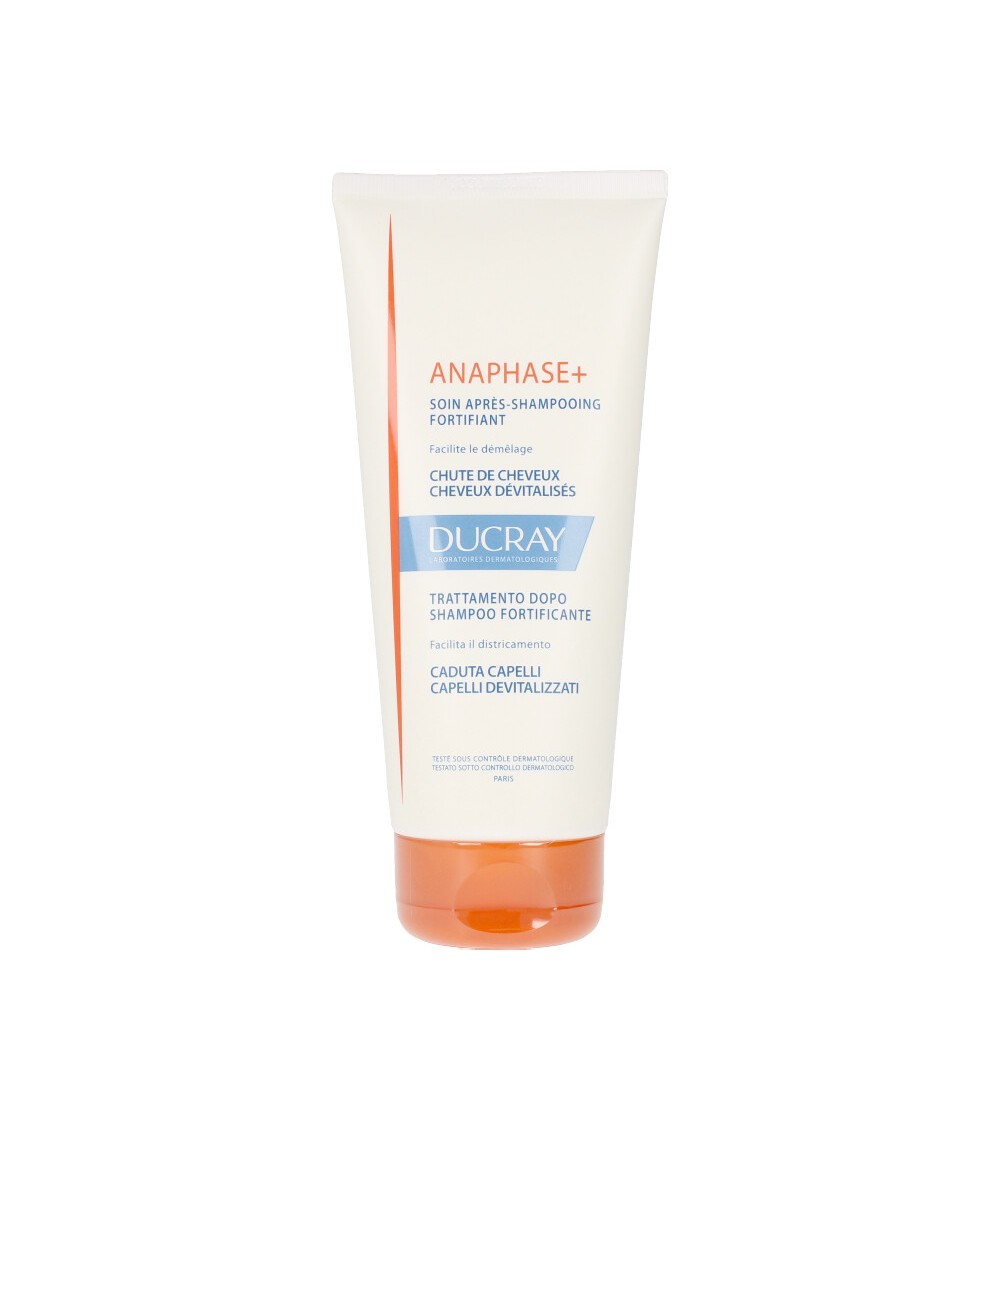 ANAPHASE+ Soin après-shampoing fortifiant 200 ml